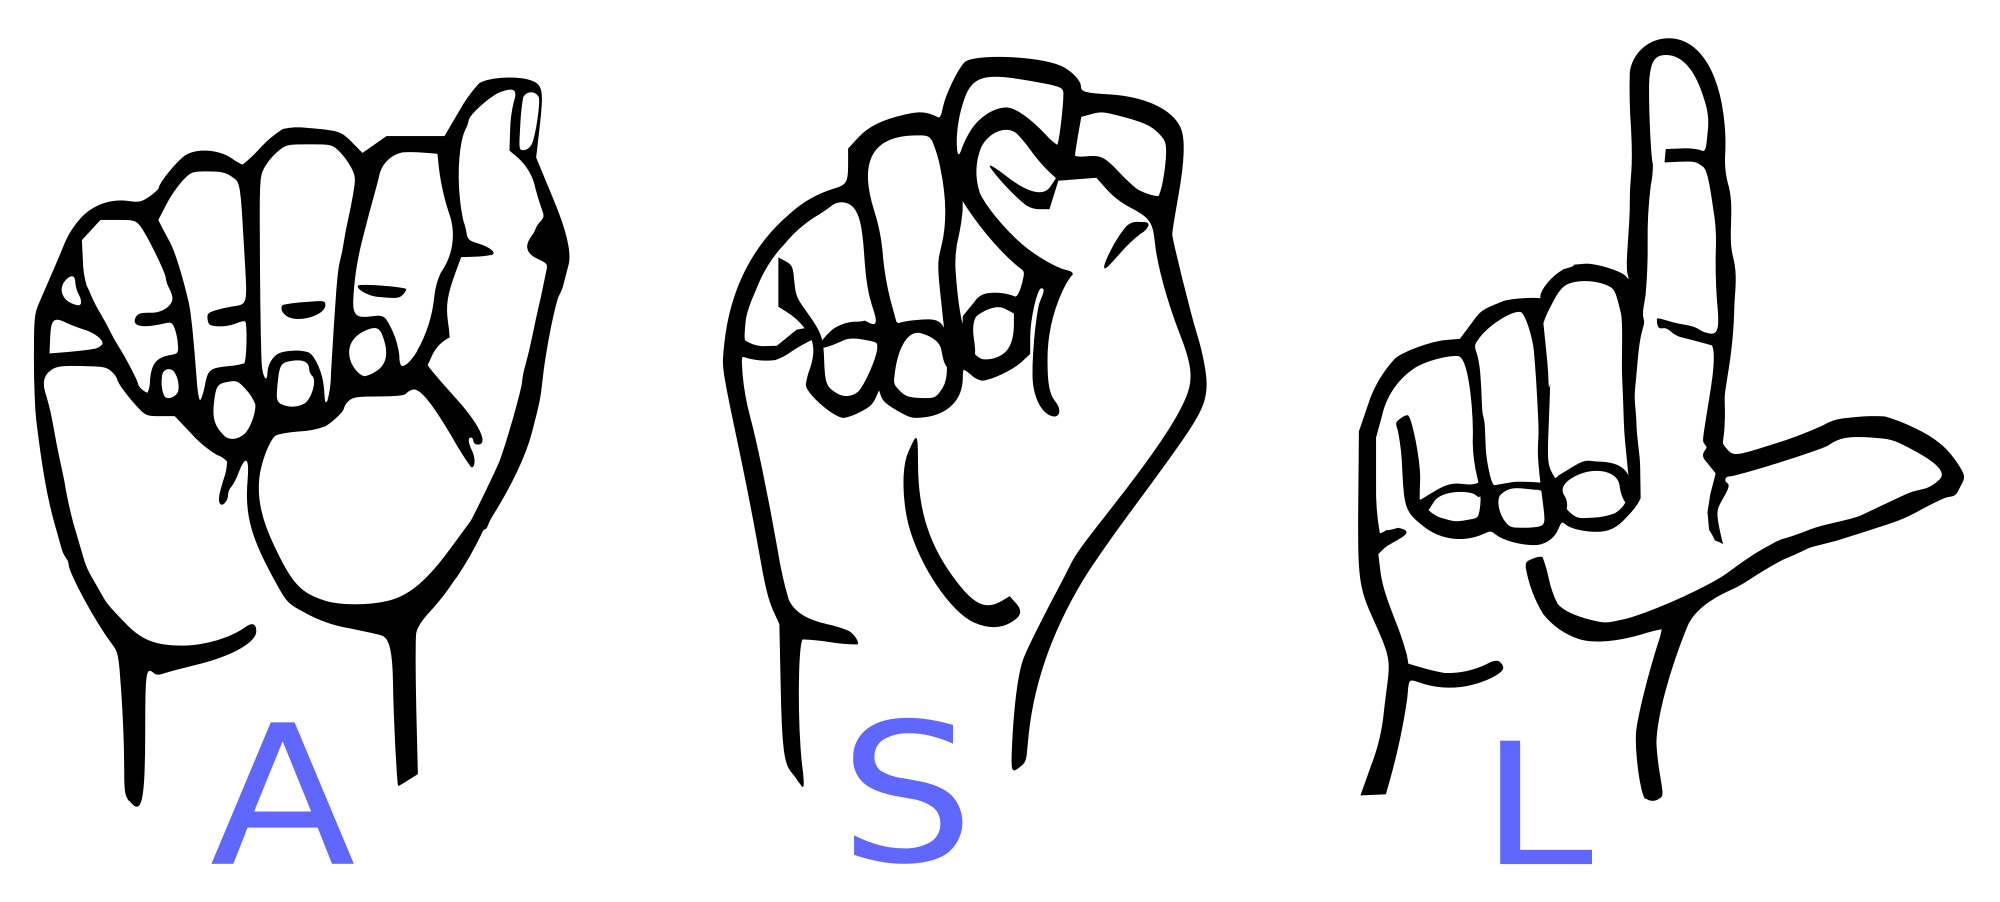 Drawing of three hands spelling out ASL in sign language.